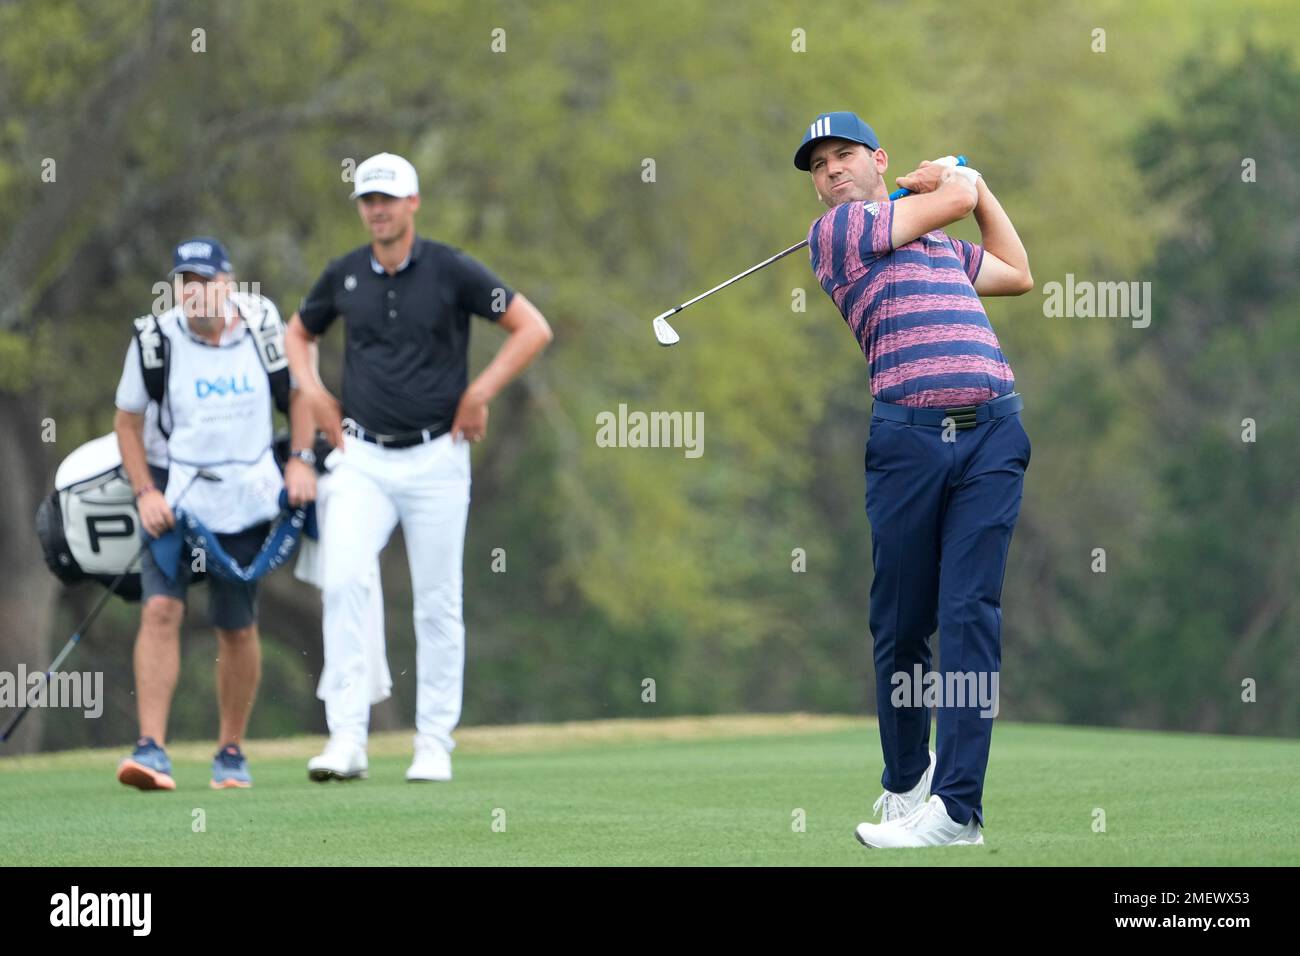 Sergio Garcia, of Spain, hits his second shot out of bounds on the No